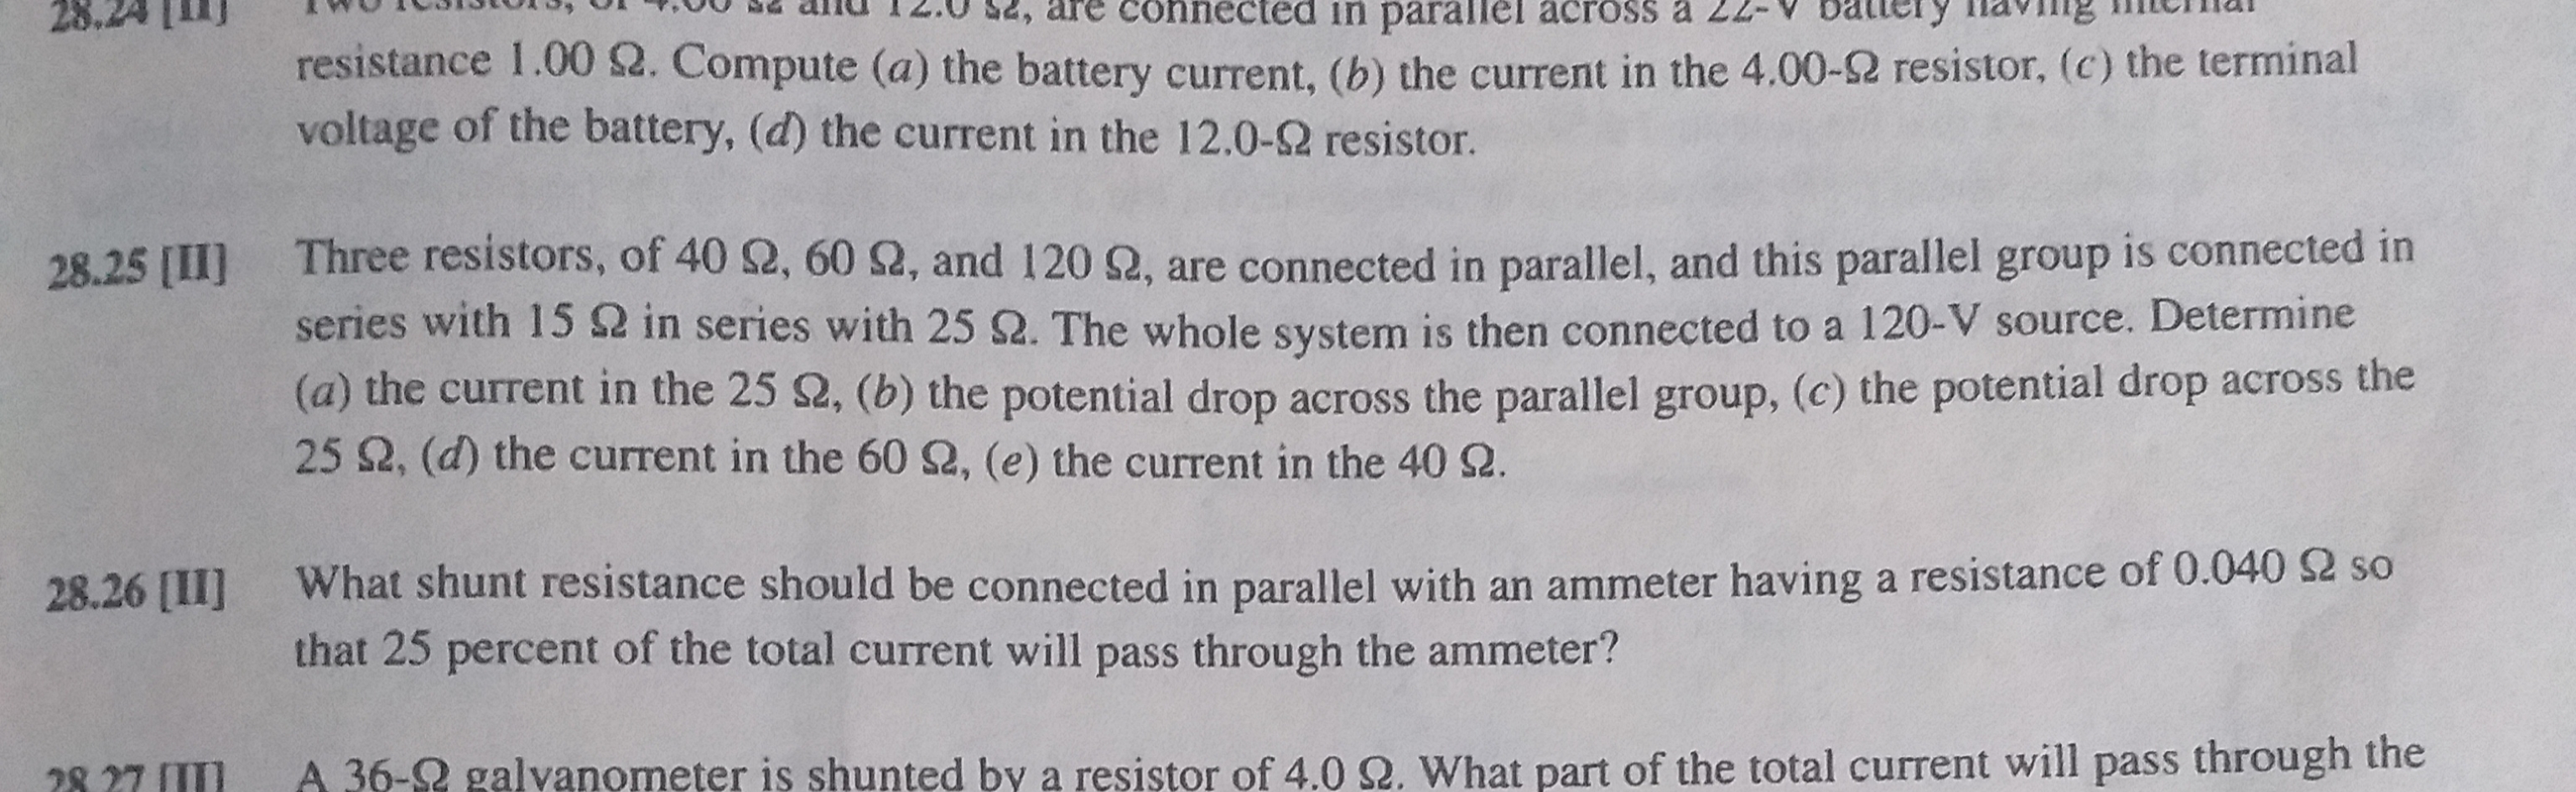 28.25 [II]
Three resistors, of 40 2, 60 2, and 120 2, are connected in parallel, and this parallel group is connected in
series with 152 in series with 25 2. The whole system is then connected to a 120-V source. Determine
(a) the current in the 25 2, (b) the potential drop across the parallel group, (c) the potential drop across the
25 2, (d) the current in the 60 2, (e) the current in the 40 2.
